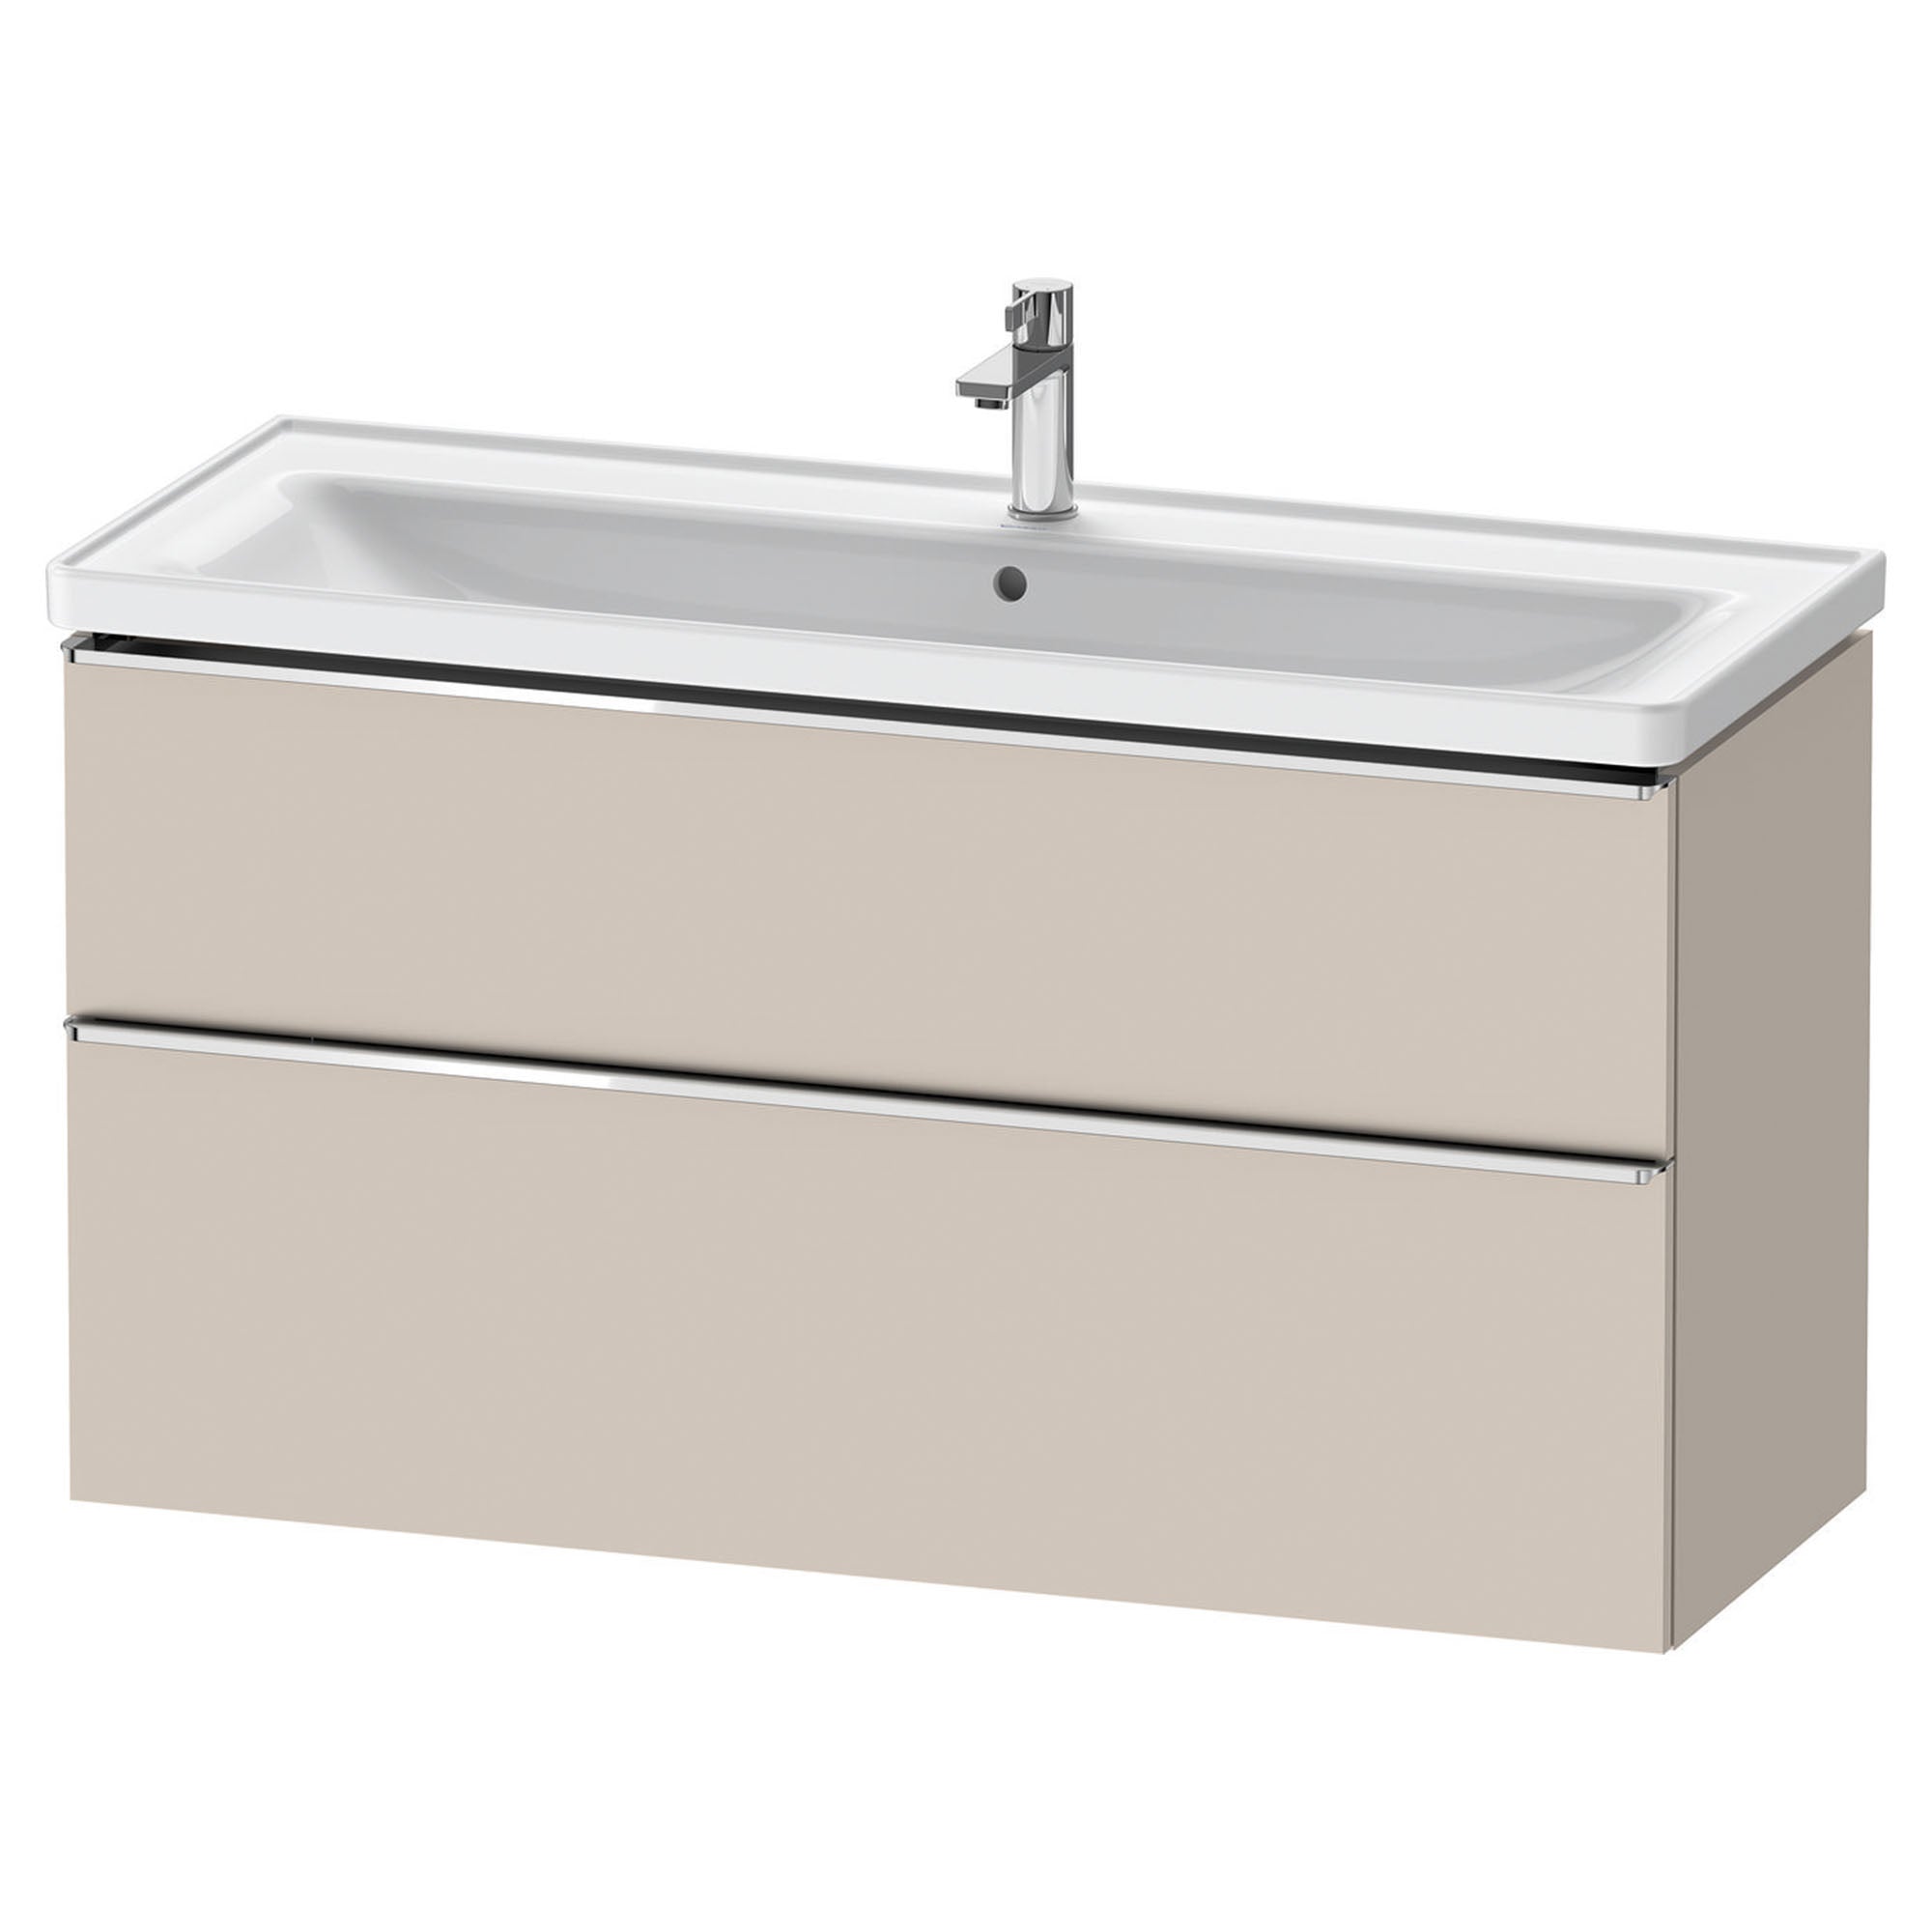 duravit d-neo 1200mm wall mounted vanity unit with d-neo basin taupe chrome handles